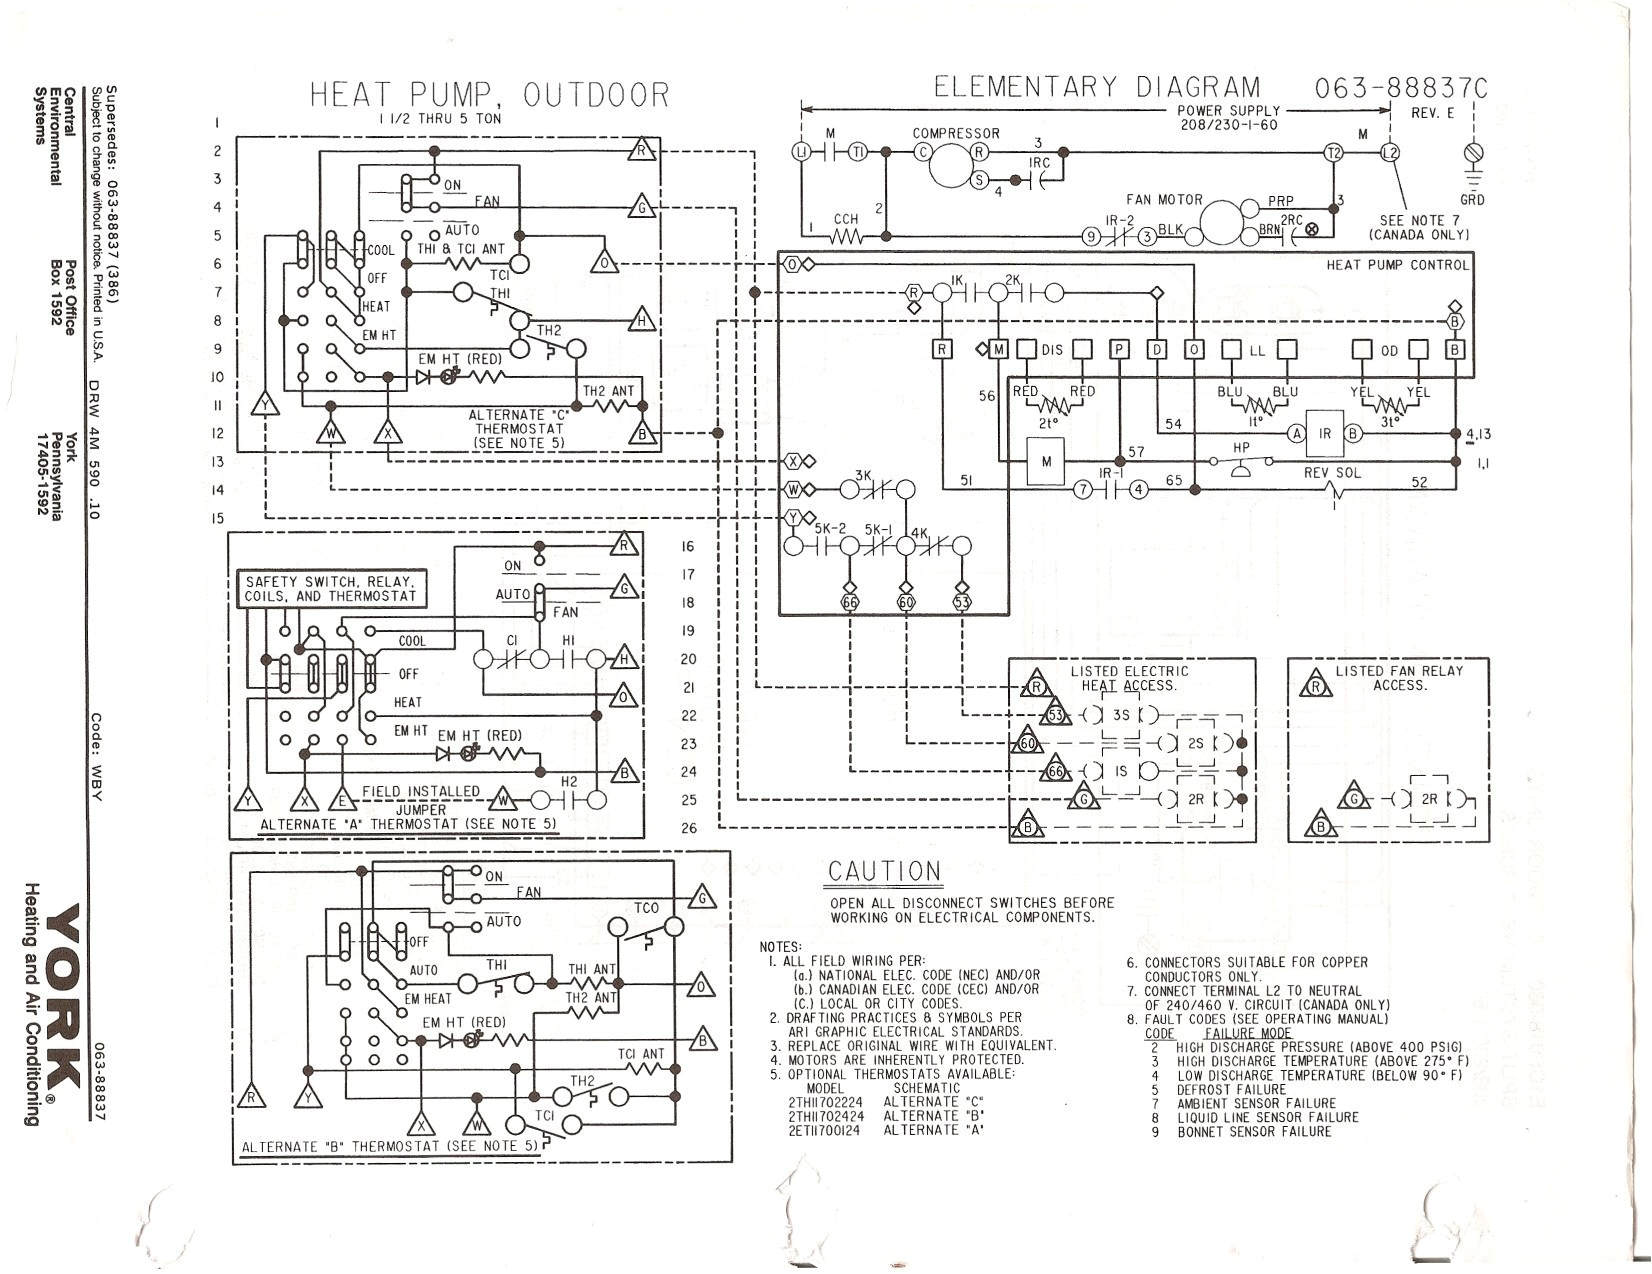 rooftop unit schematic wiring diagram rooftop heating wiring diagram